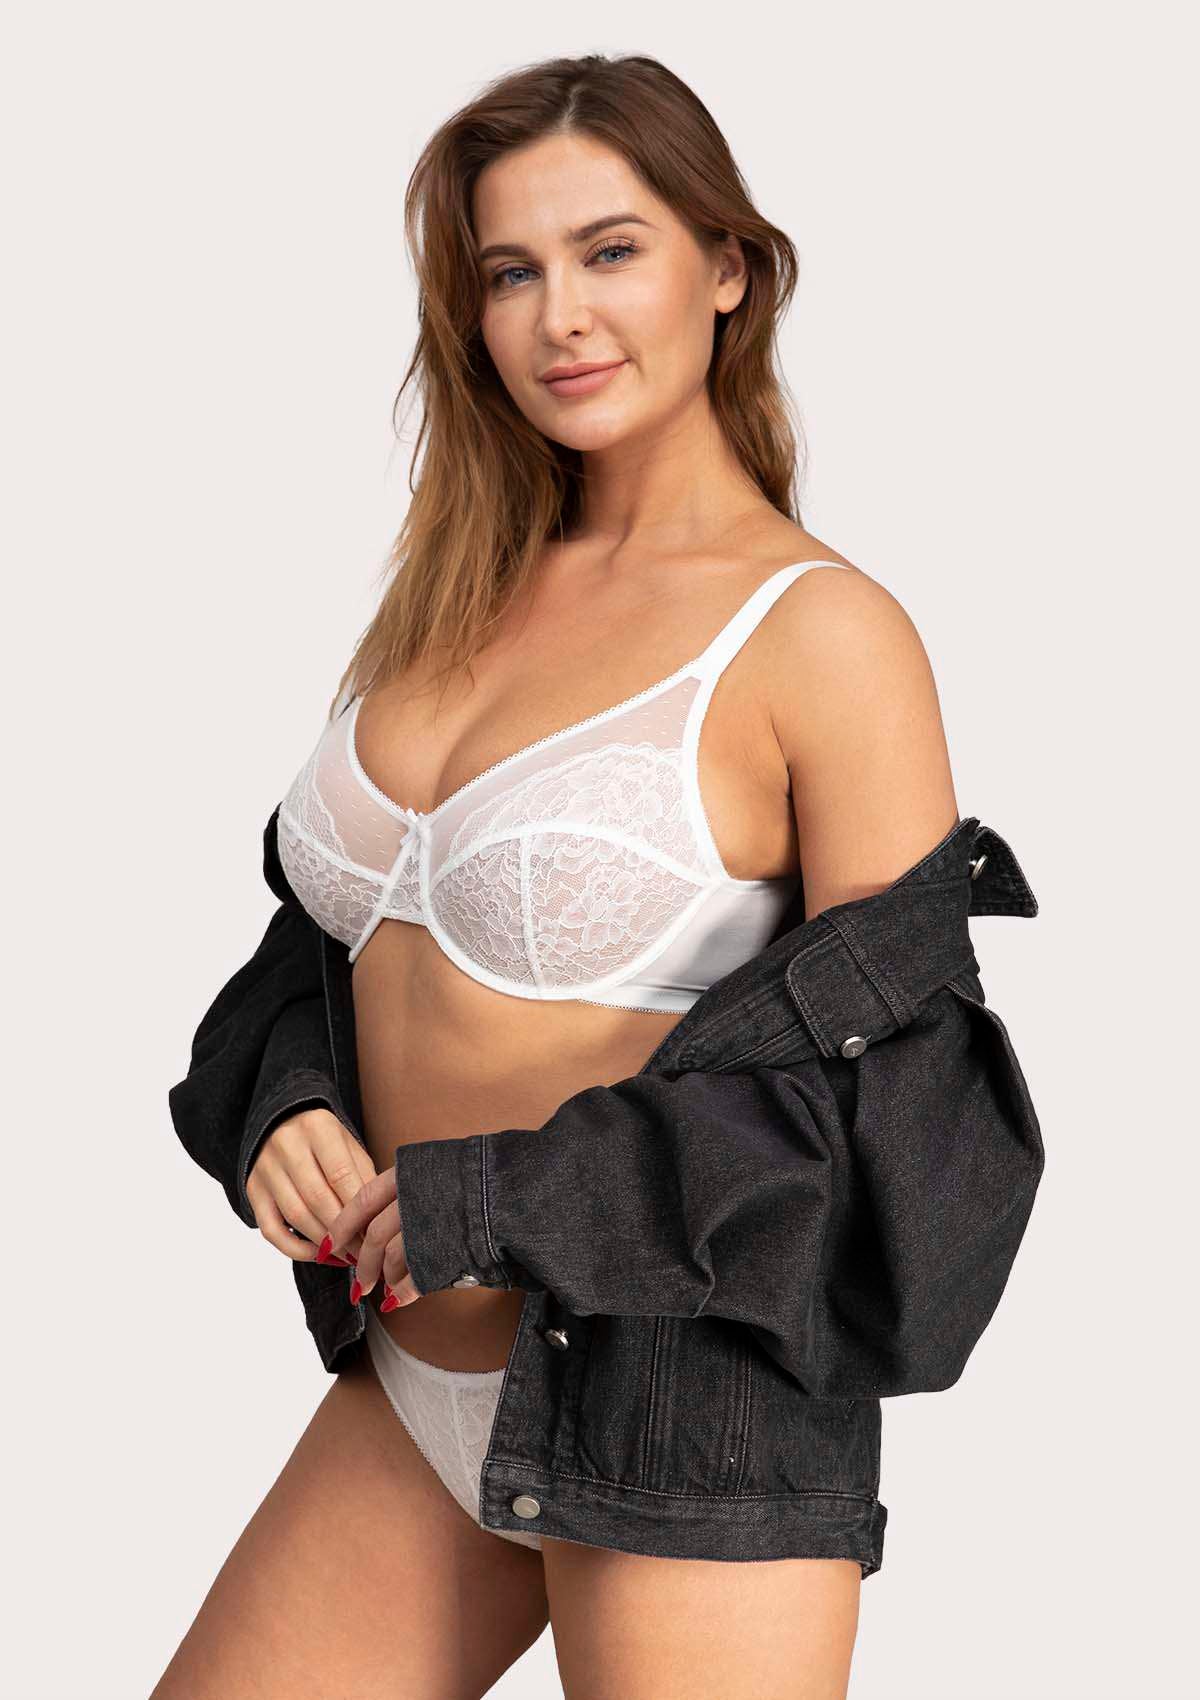 HSIA Enchante Lace Bra And Panties Set: Bra For Side And Back Fat - White / 42 / DDD/F